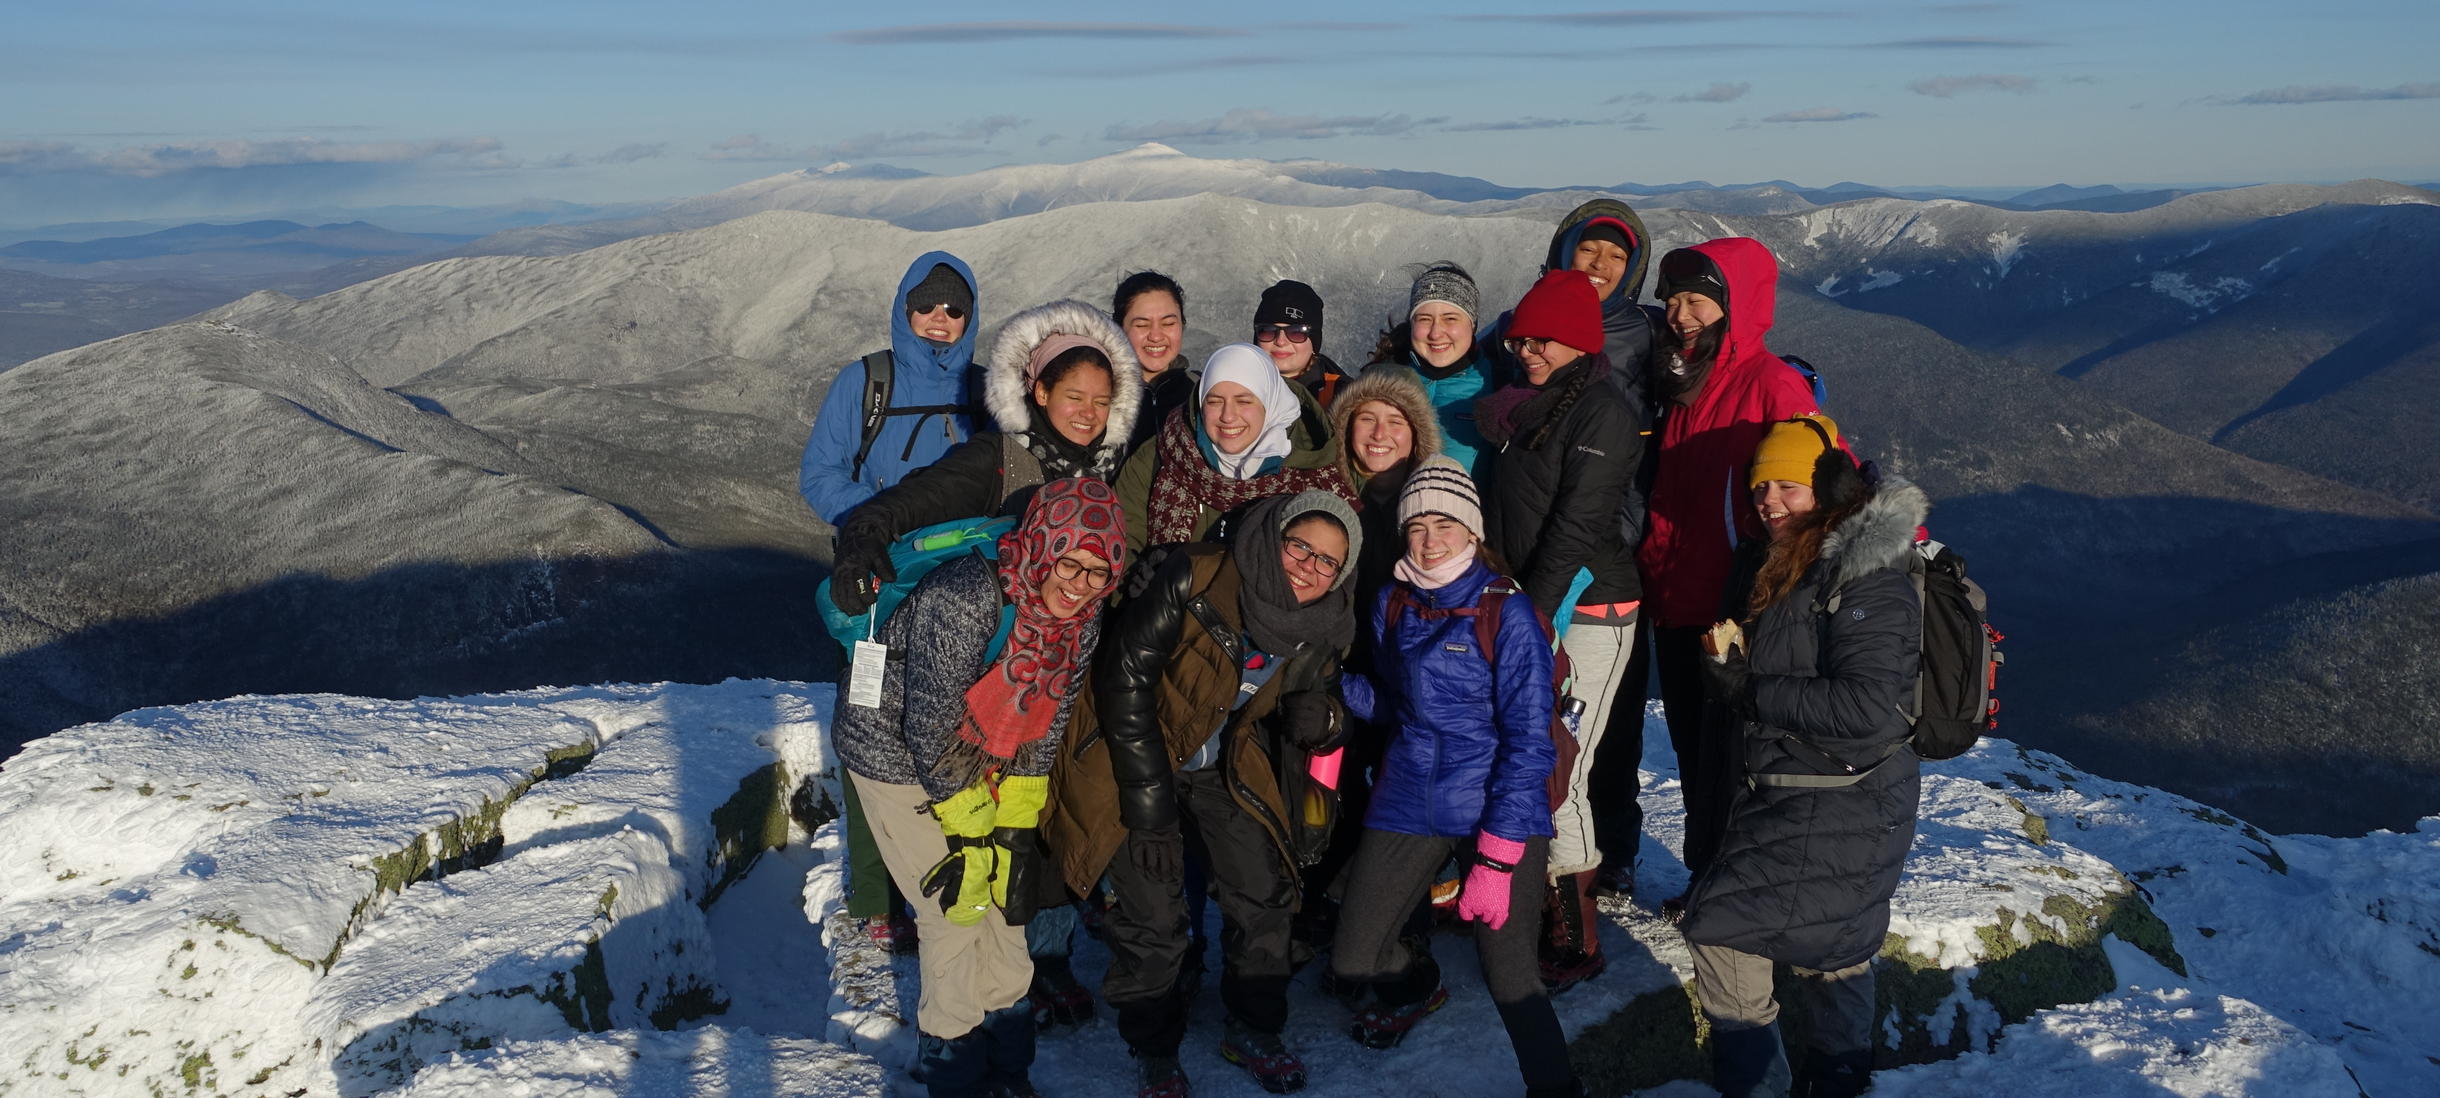 Group of students smiling on top of mountain